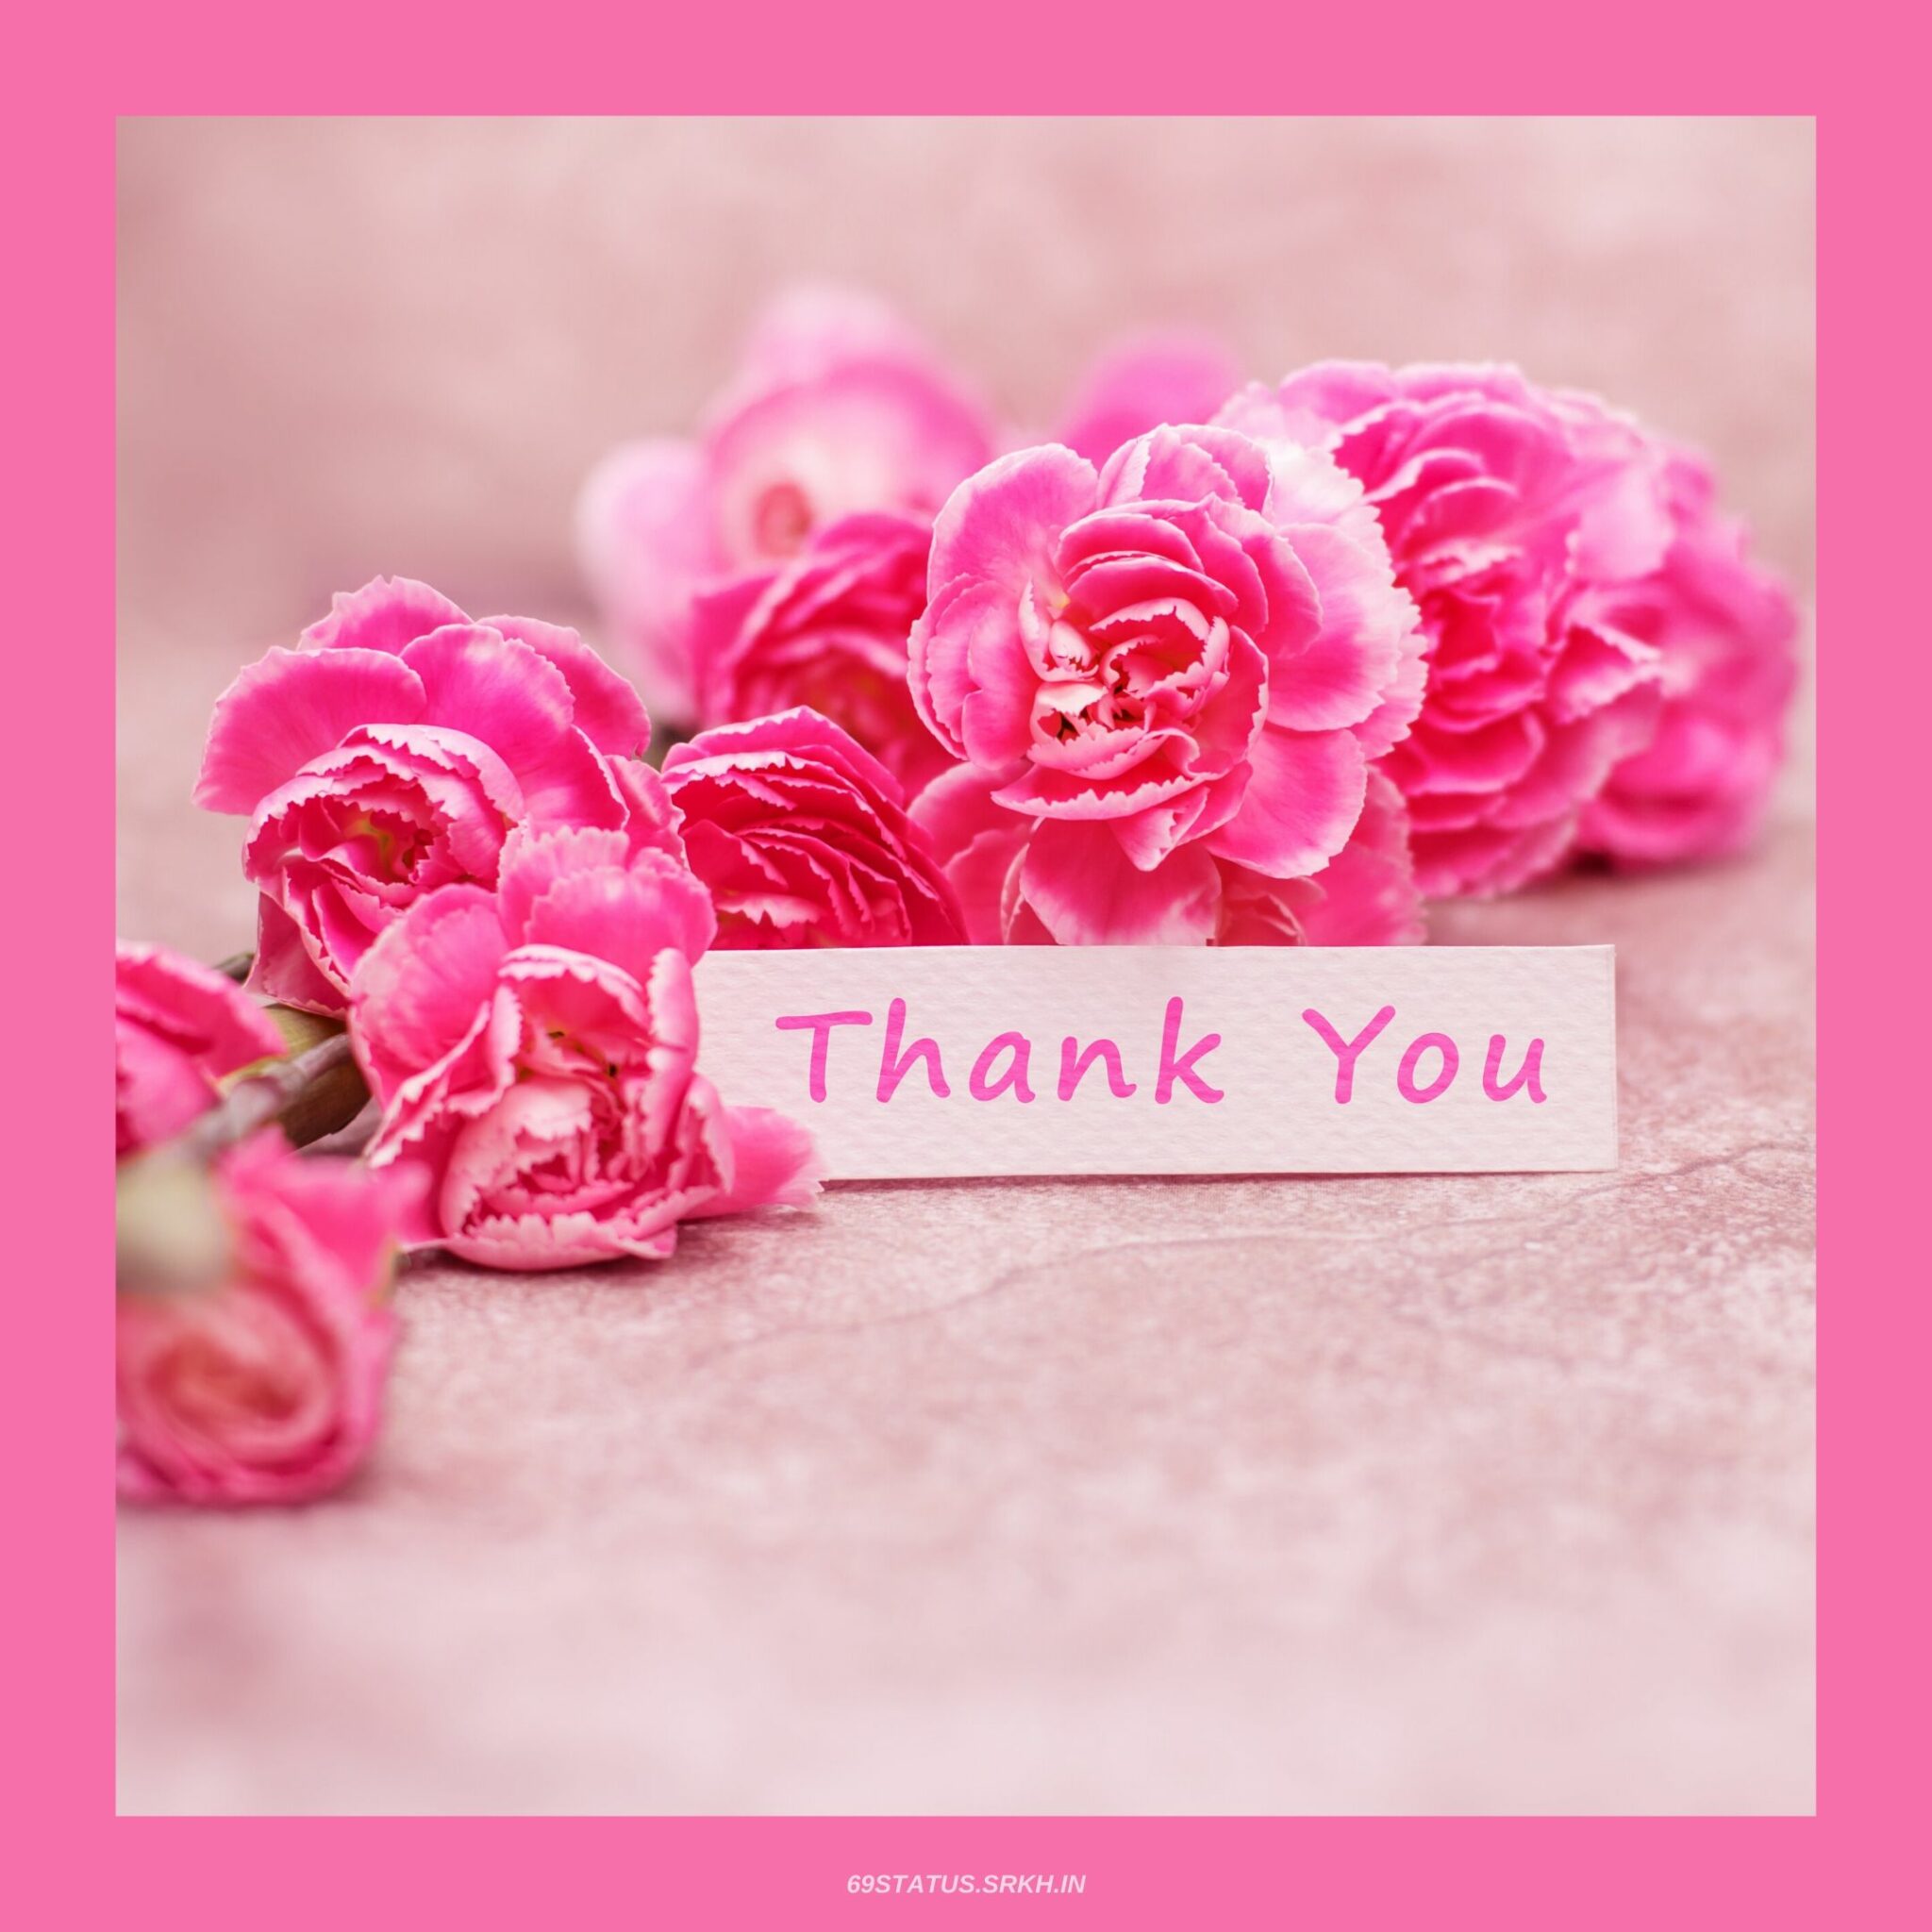 🔥 Thank You Images with Flowers HD Download free - Images SRkh